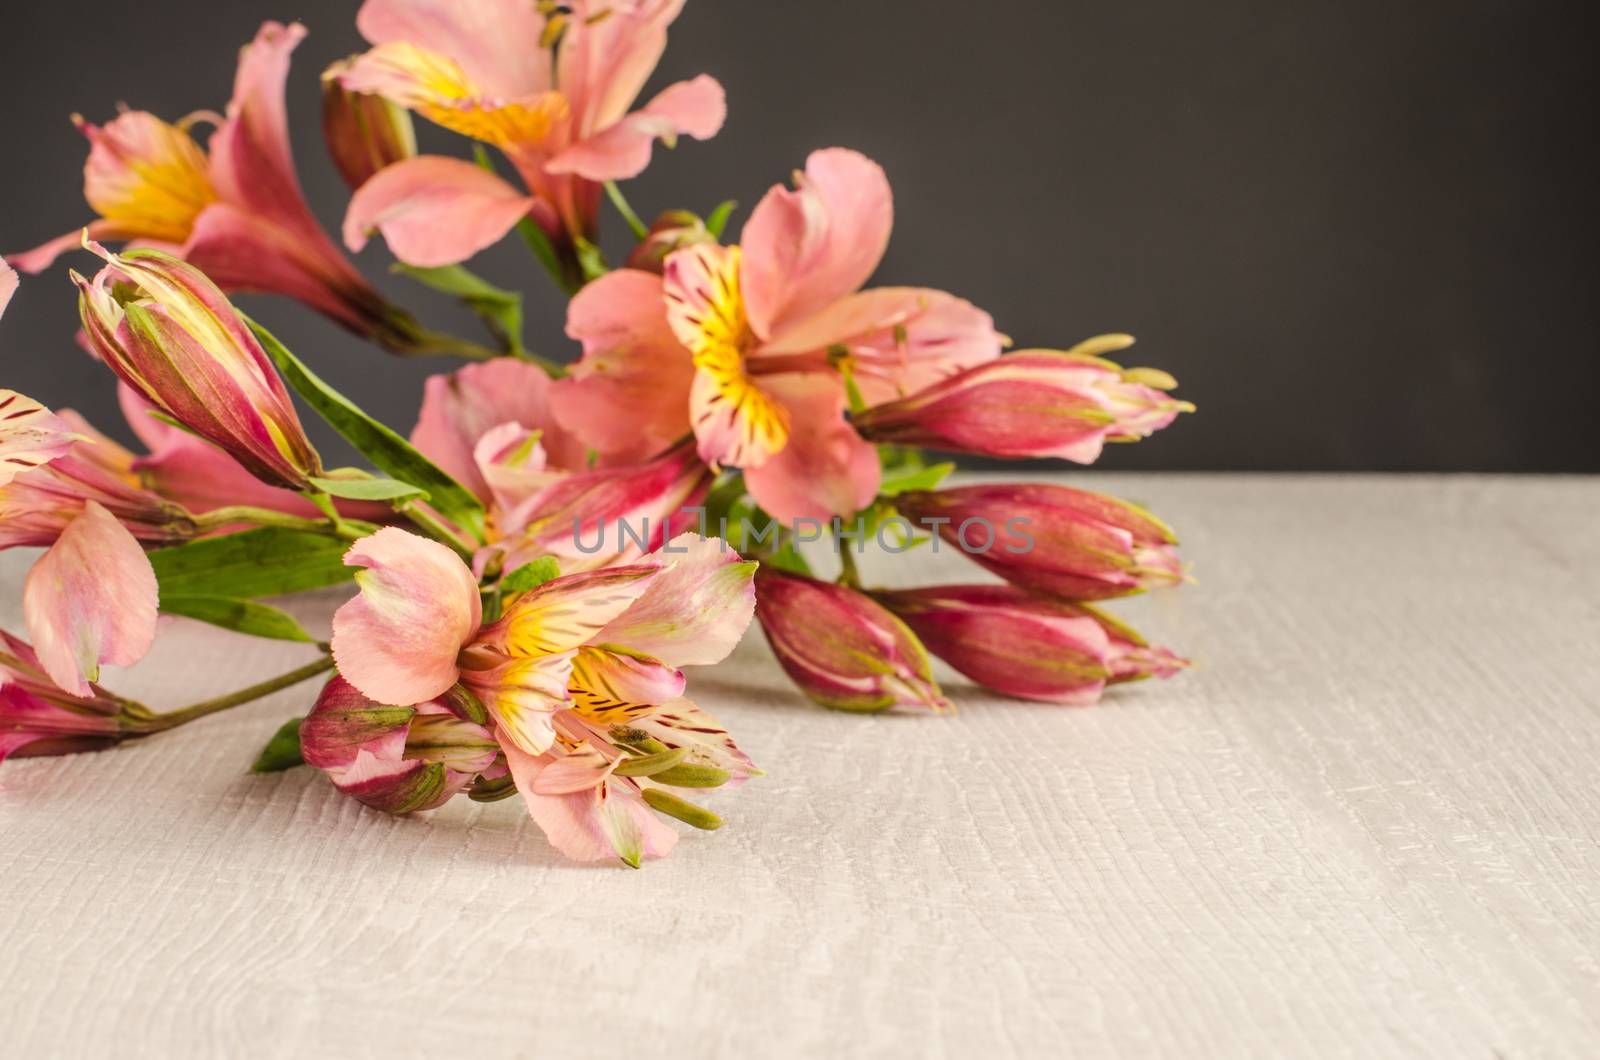 Bouquet of a beautiful alstroemeria flowers on wood by AnaMarques